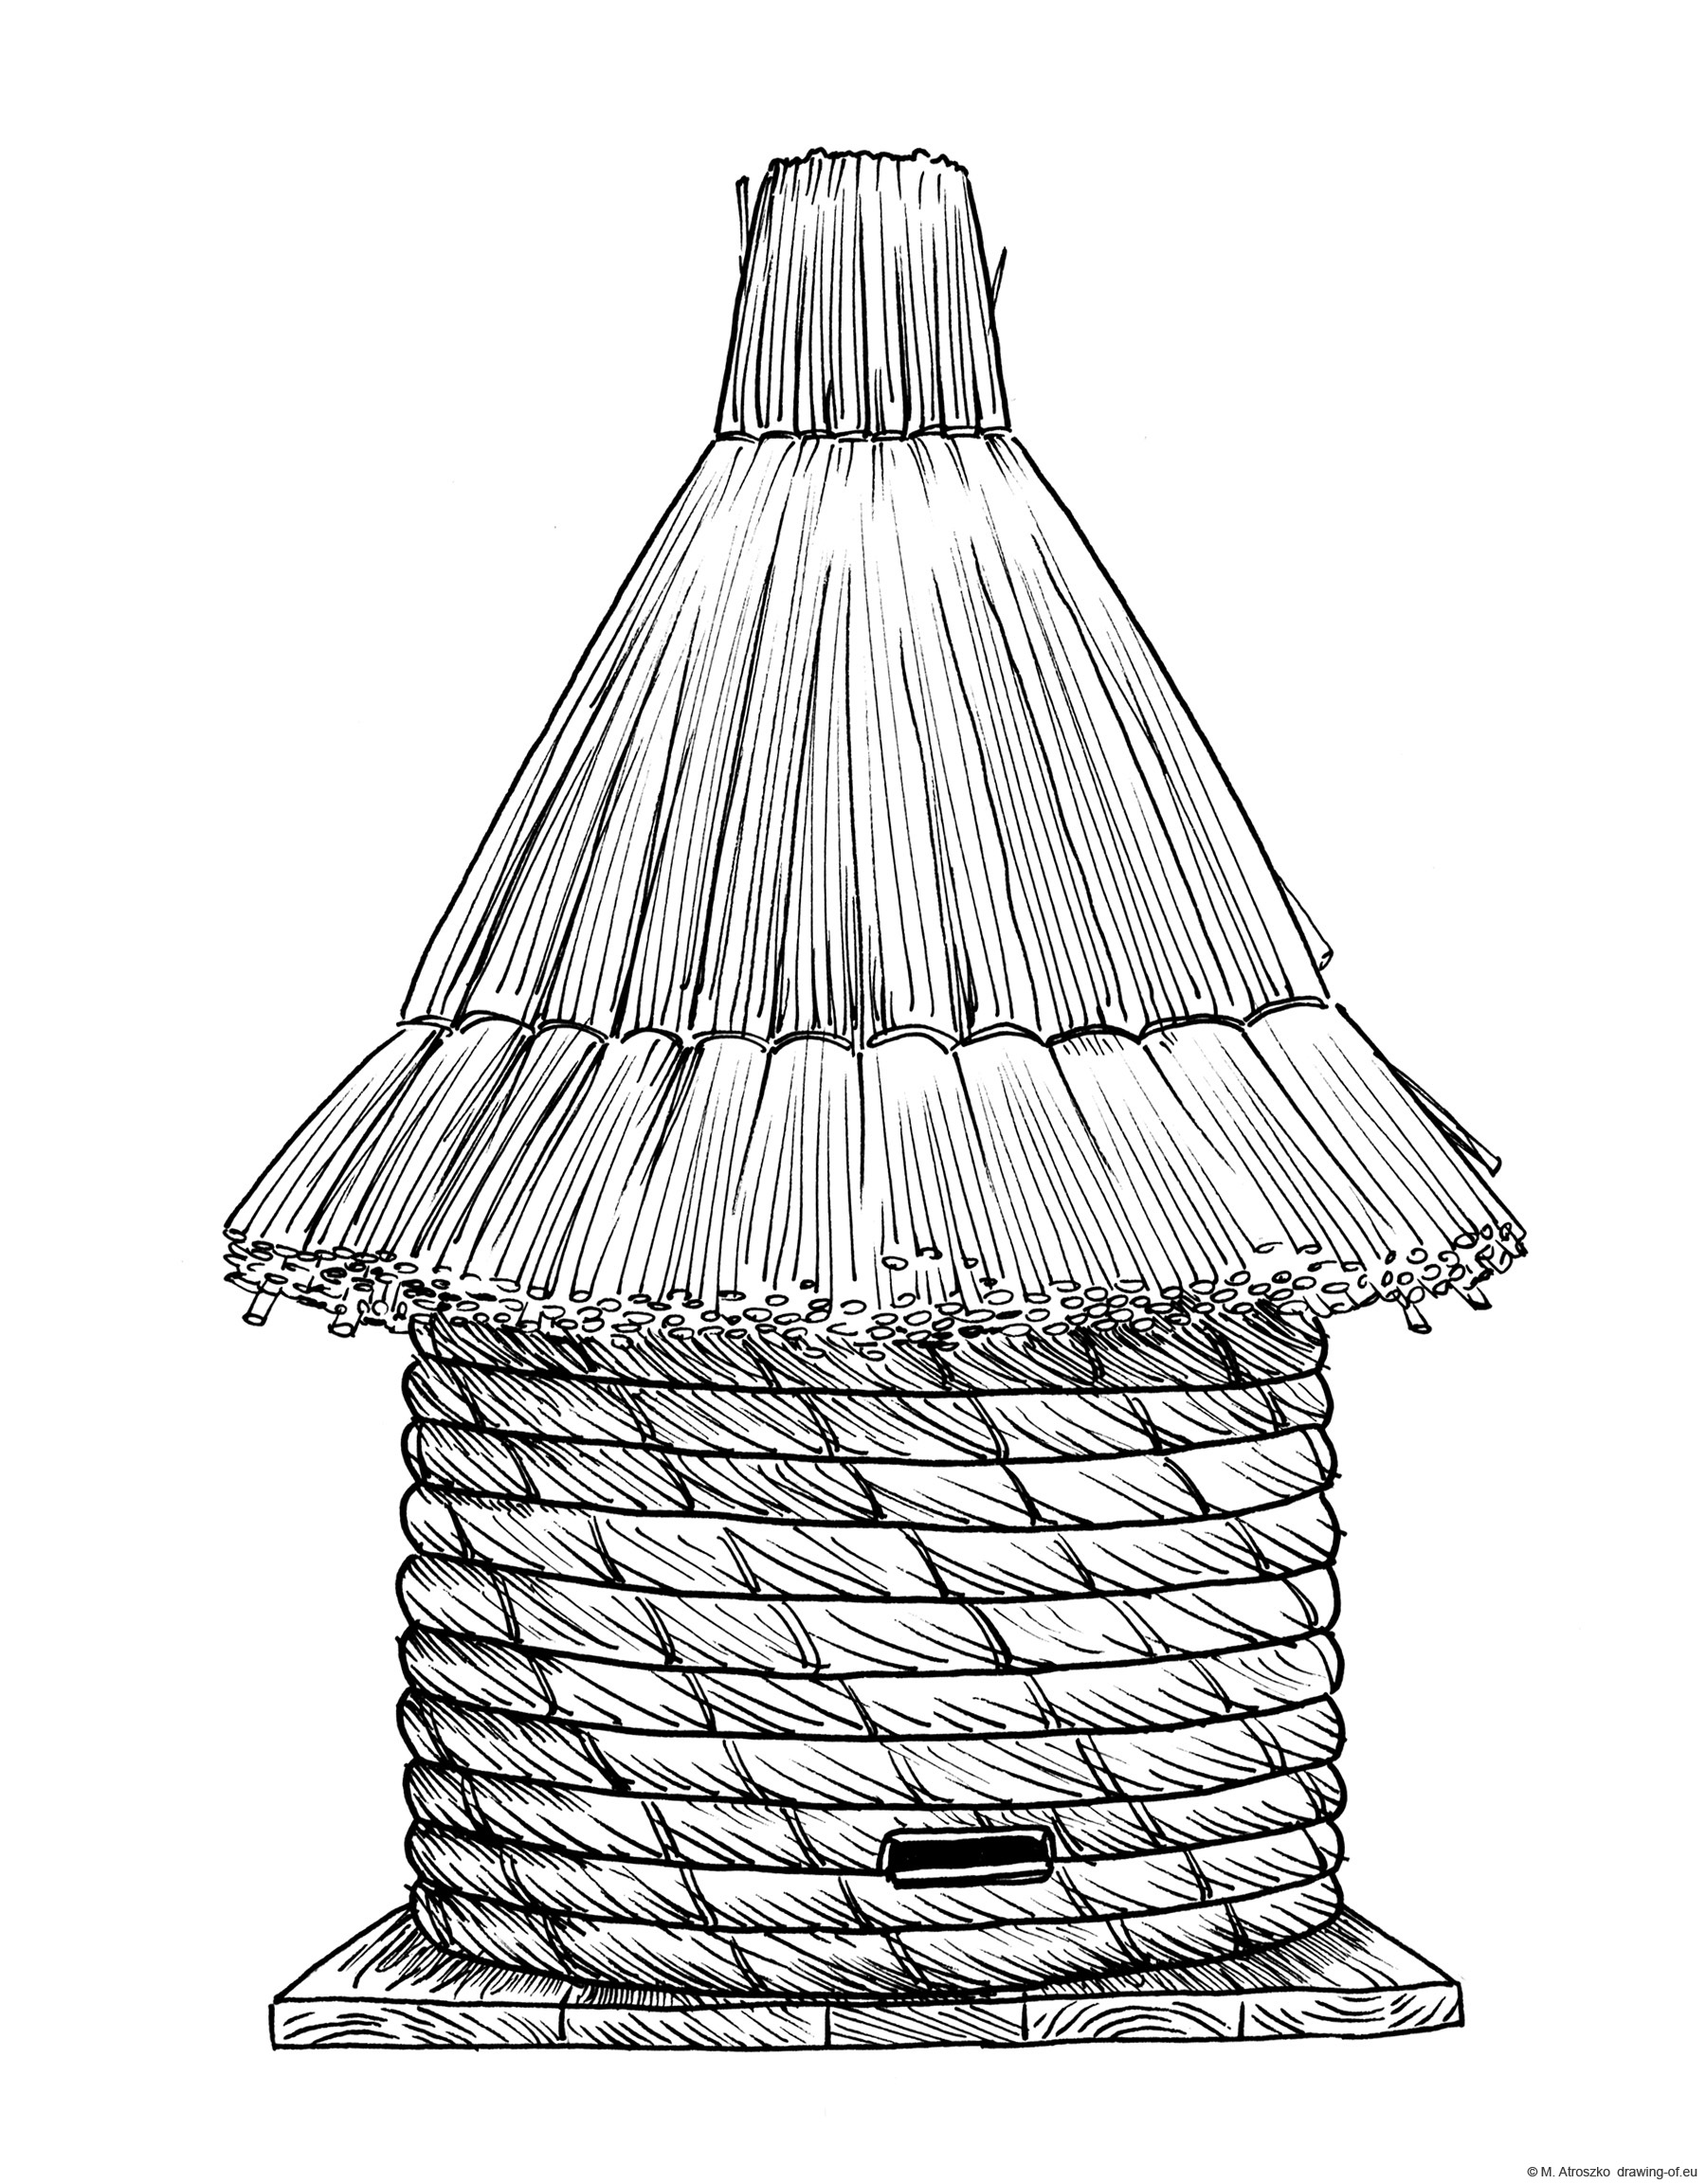 Drawing of beehive